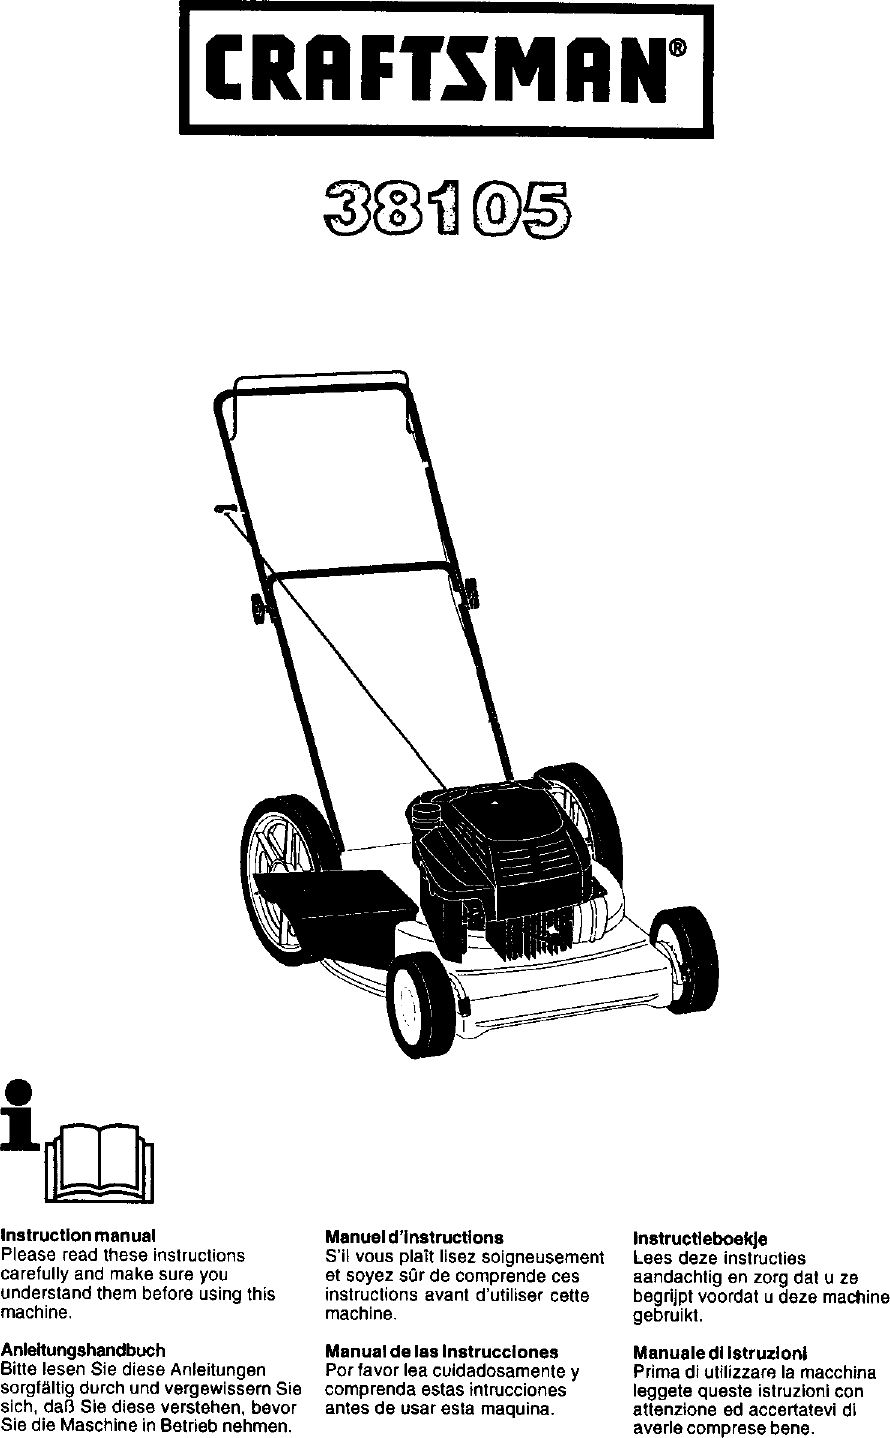 Page Of Great Dane Lawn Mower Gskh S User Guide Manualsonline Hot Sex Picture